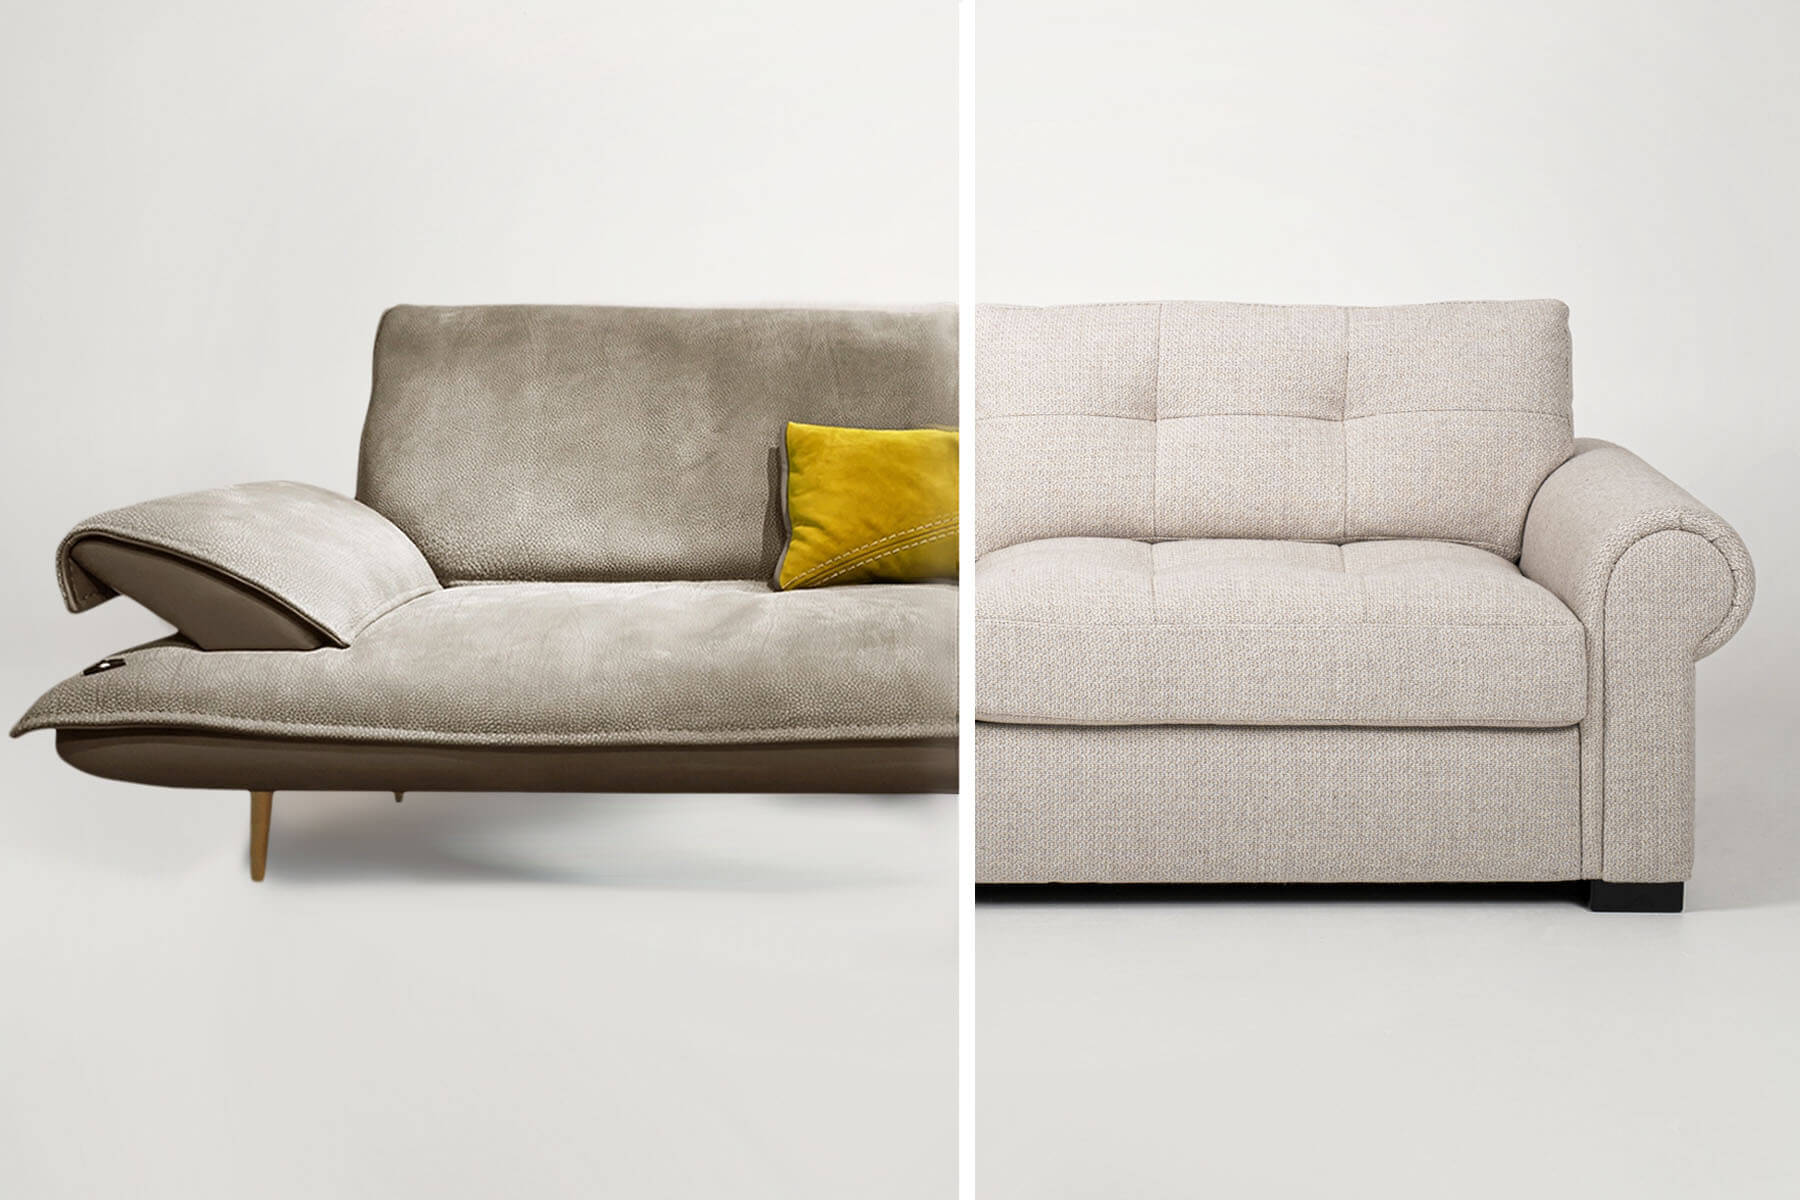 Konvention deformation Fisker The Difference Between Sofa and Couch | San Francisco Design